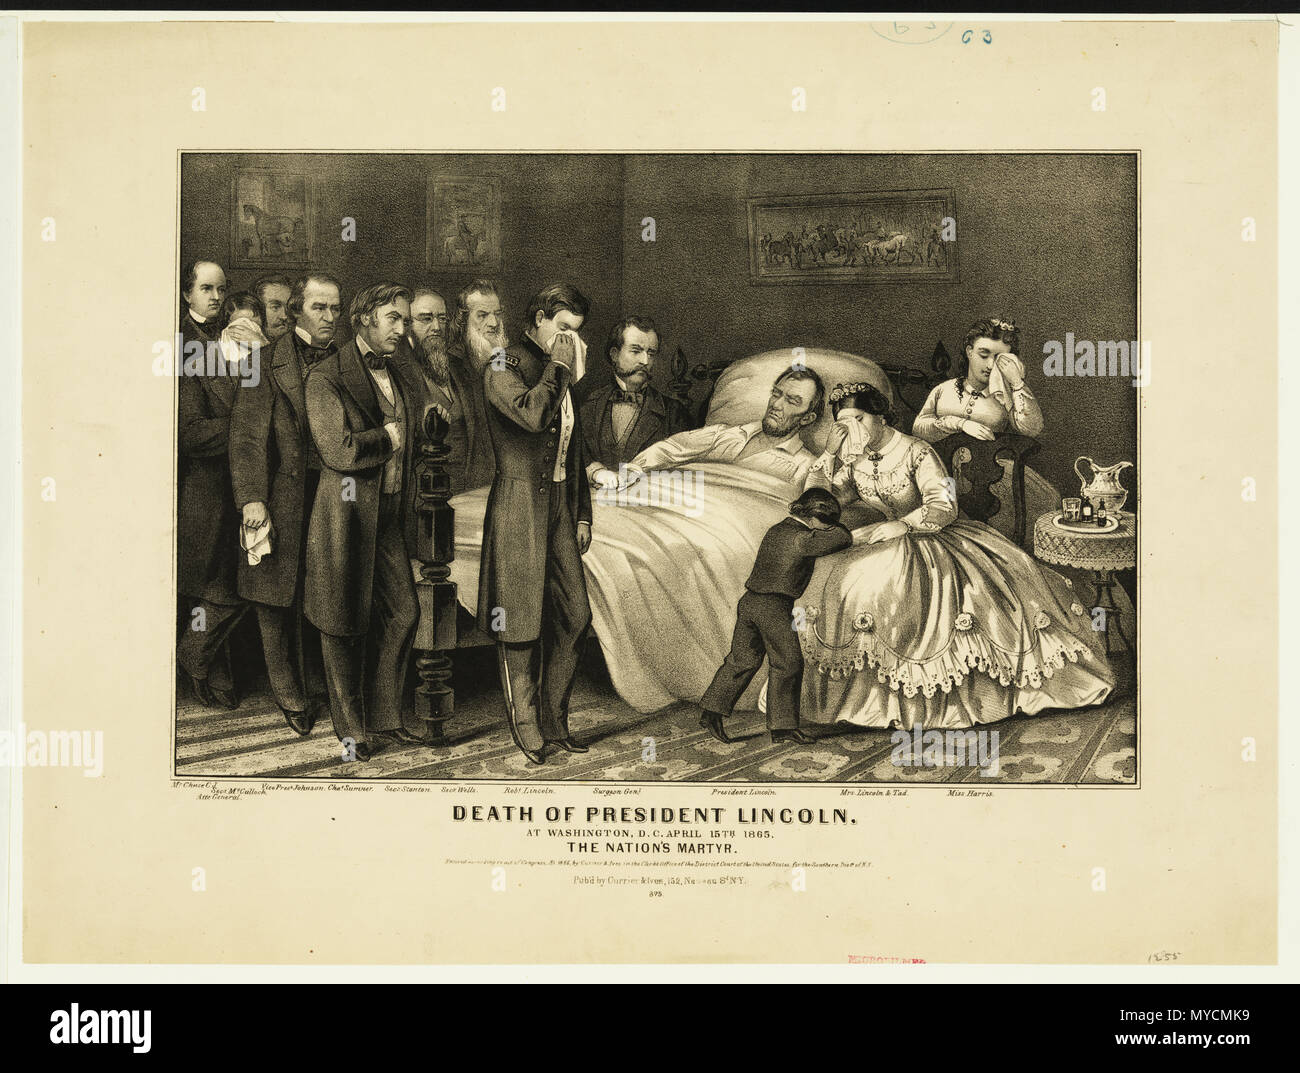 19th Century Historical Print - Death of President Lincoln At Washington, D.C. April 15th 1865. The Nation's Martyr Stock Photo